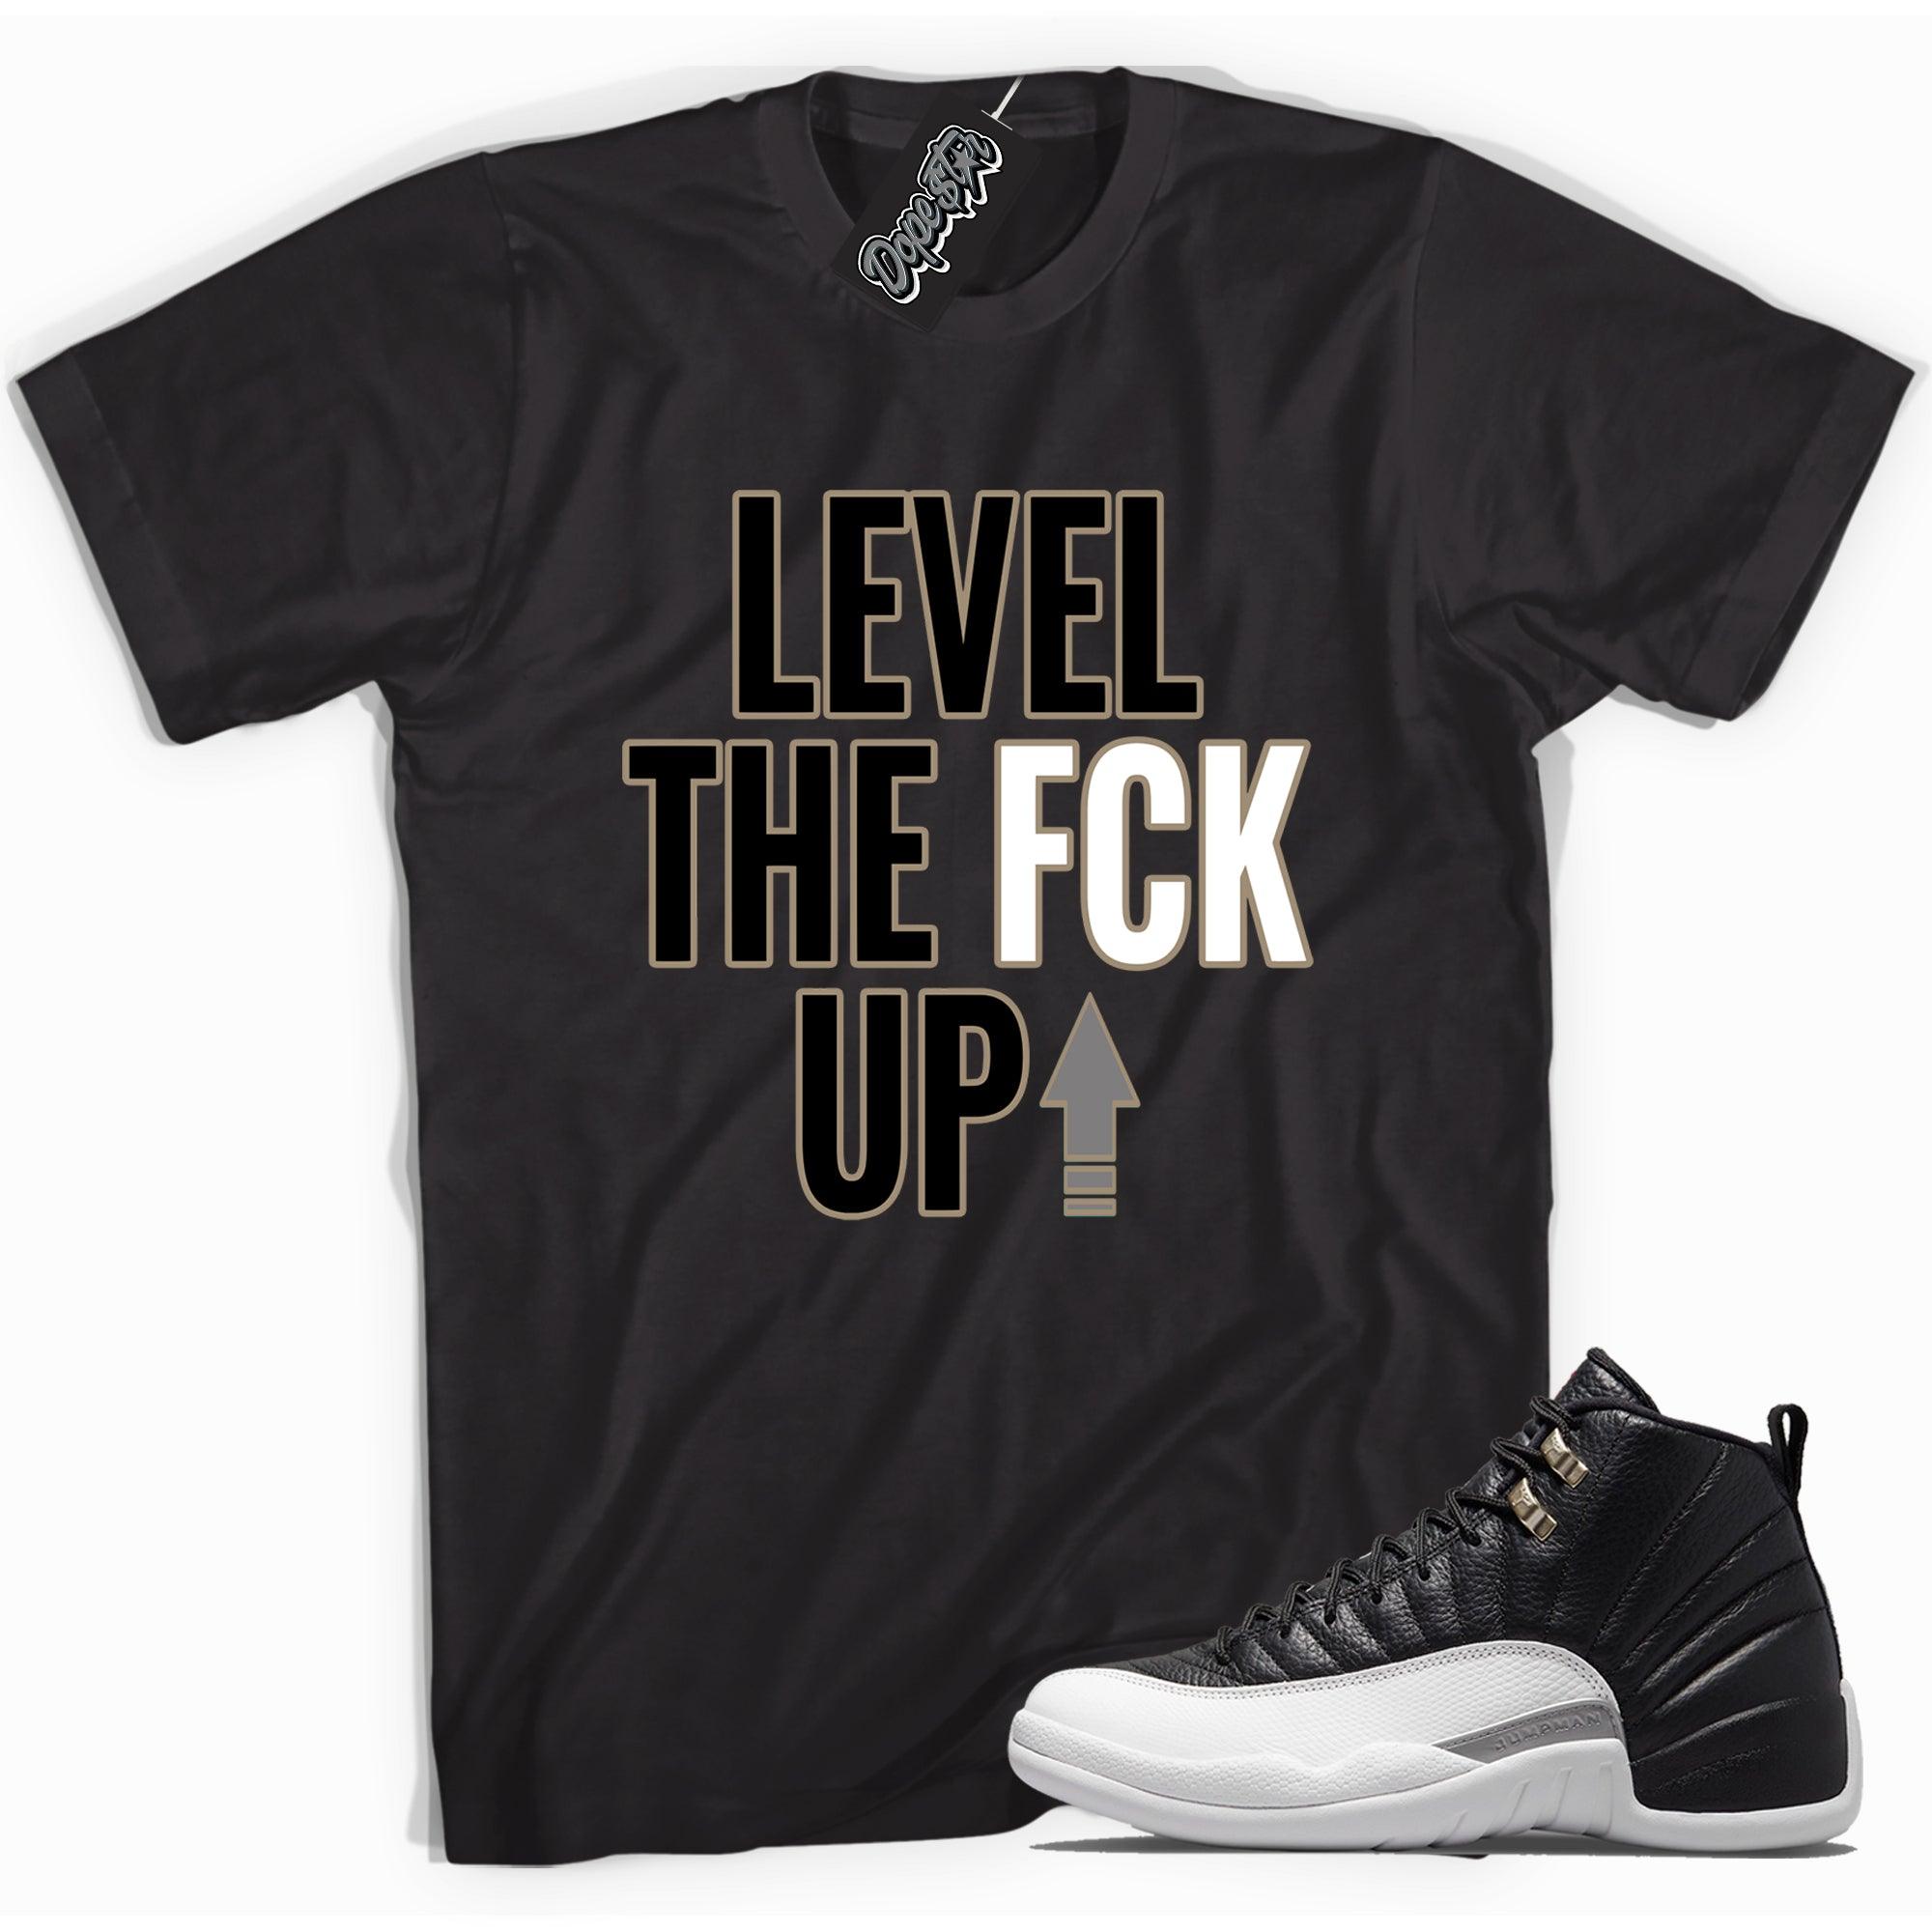 Cool black graphic tee with 'Level Up' print, that perfectly matches Air Jordan 12 Retro Playoffs Toe sneakers.